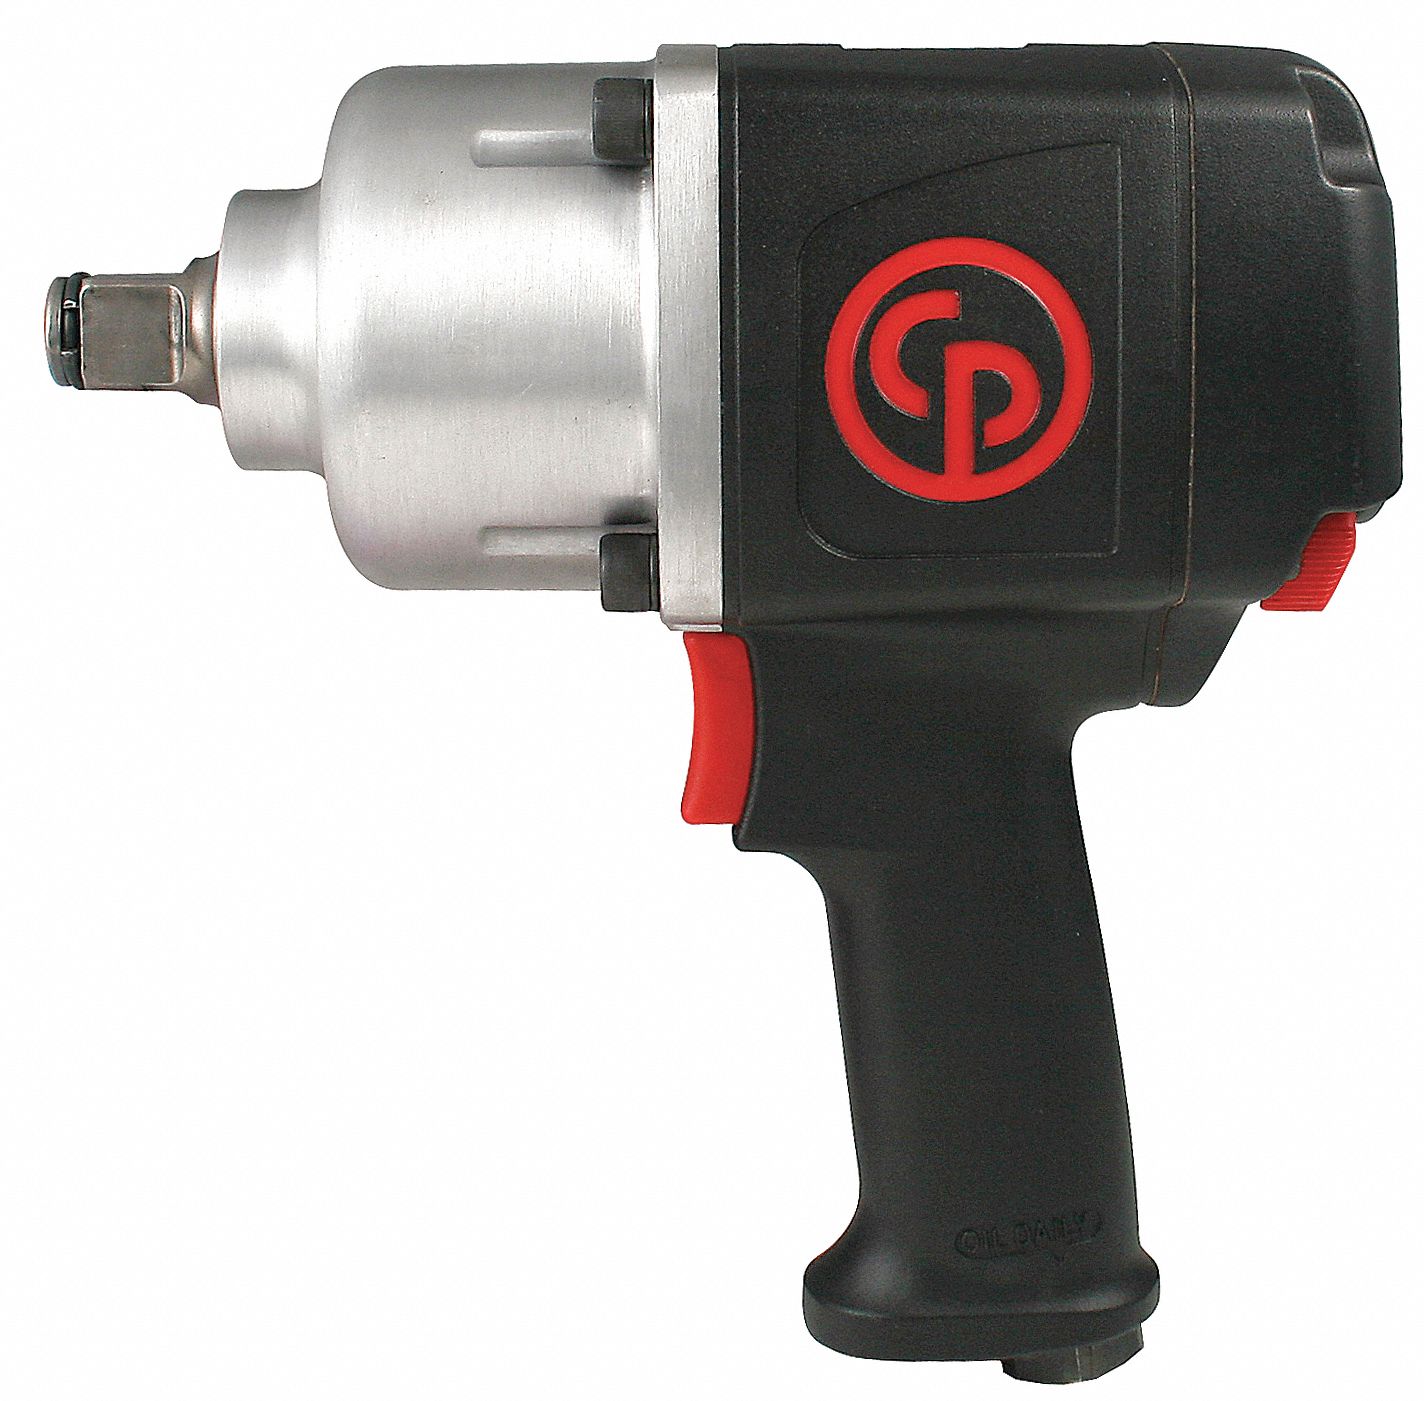 Details about   Chicago Pneumatic CP9551 3/4" Impact Wrench 